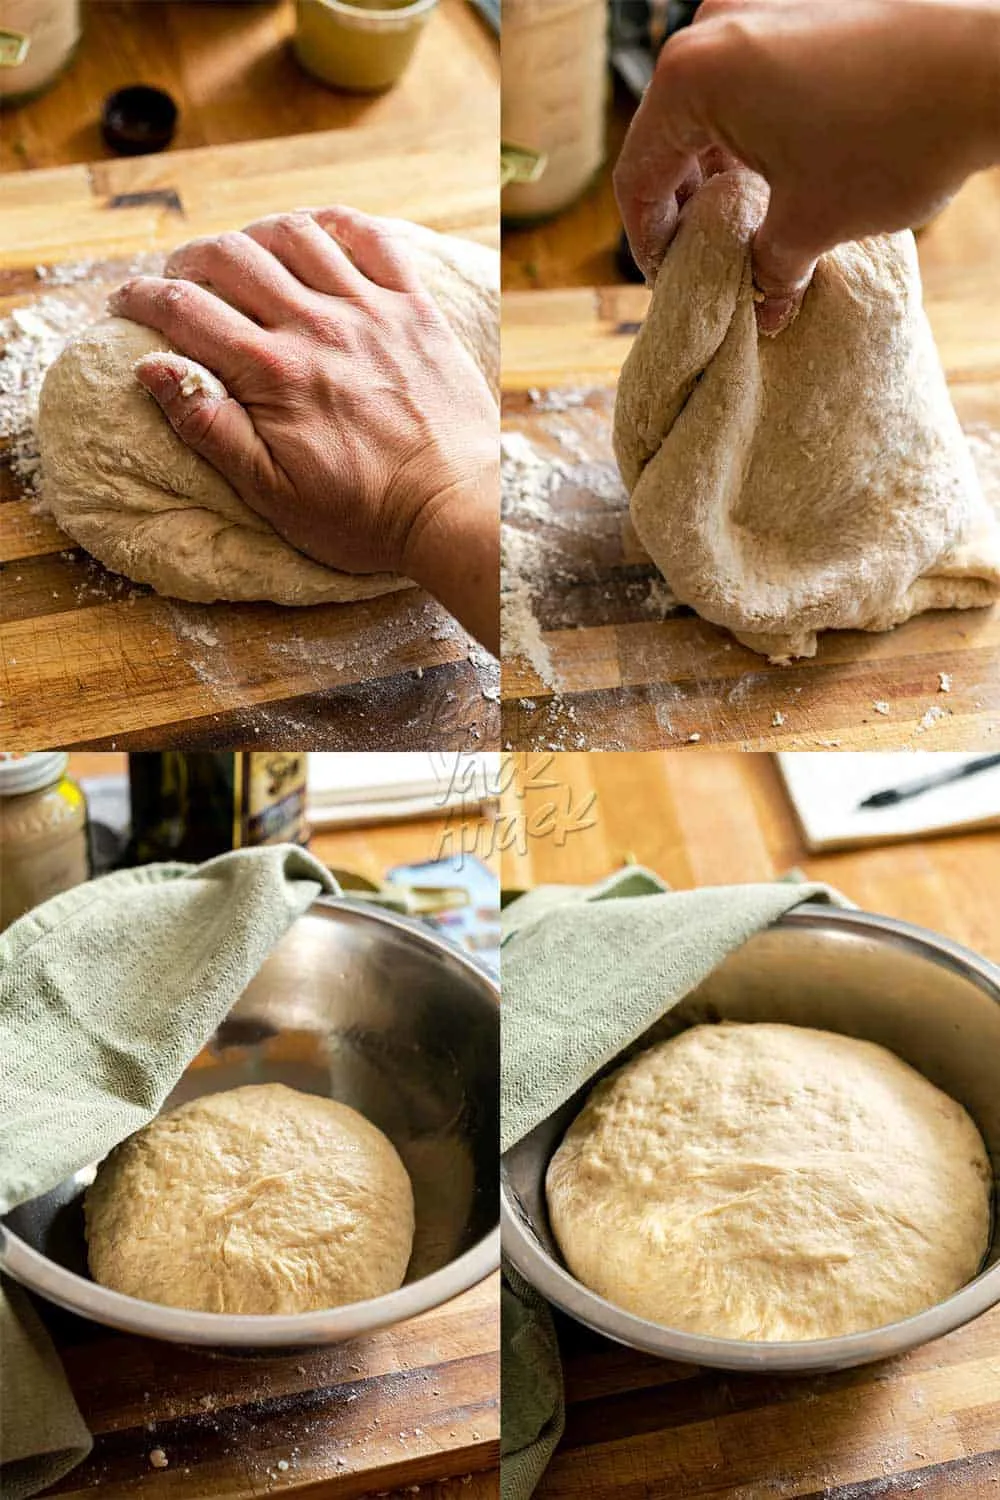 Kneading sourdough flatbread dough, and first rise